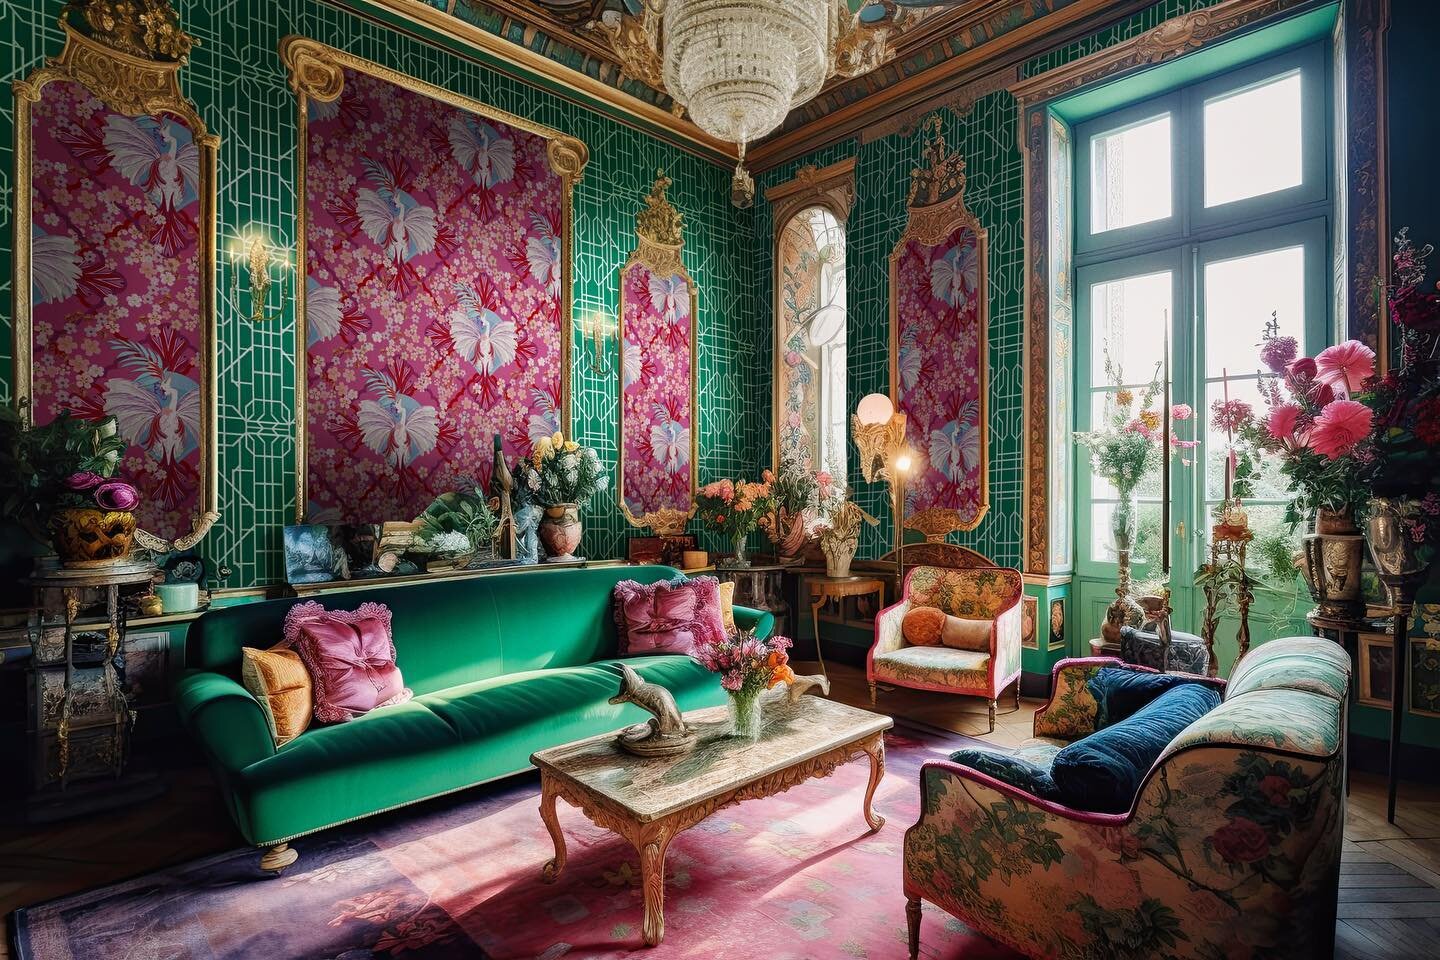 Only weeks to go until my wallpaper will be available, I&rsquo;ve designed a collection that can be mixed and matched to create a layered maximalist look. This is one of my favourites the pink &ldquo;faded glamour&rdquo; with the green bamboo trellis